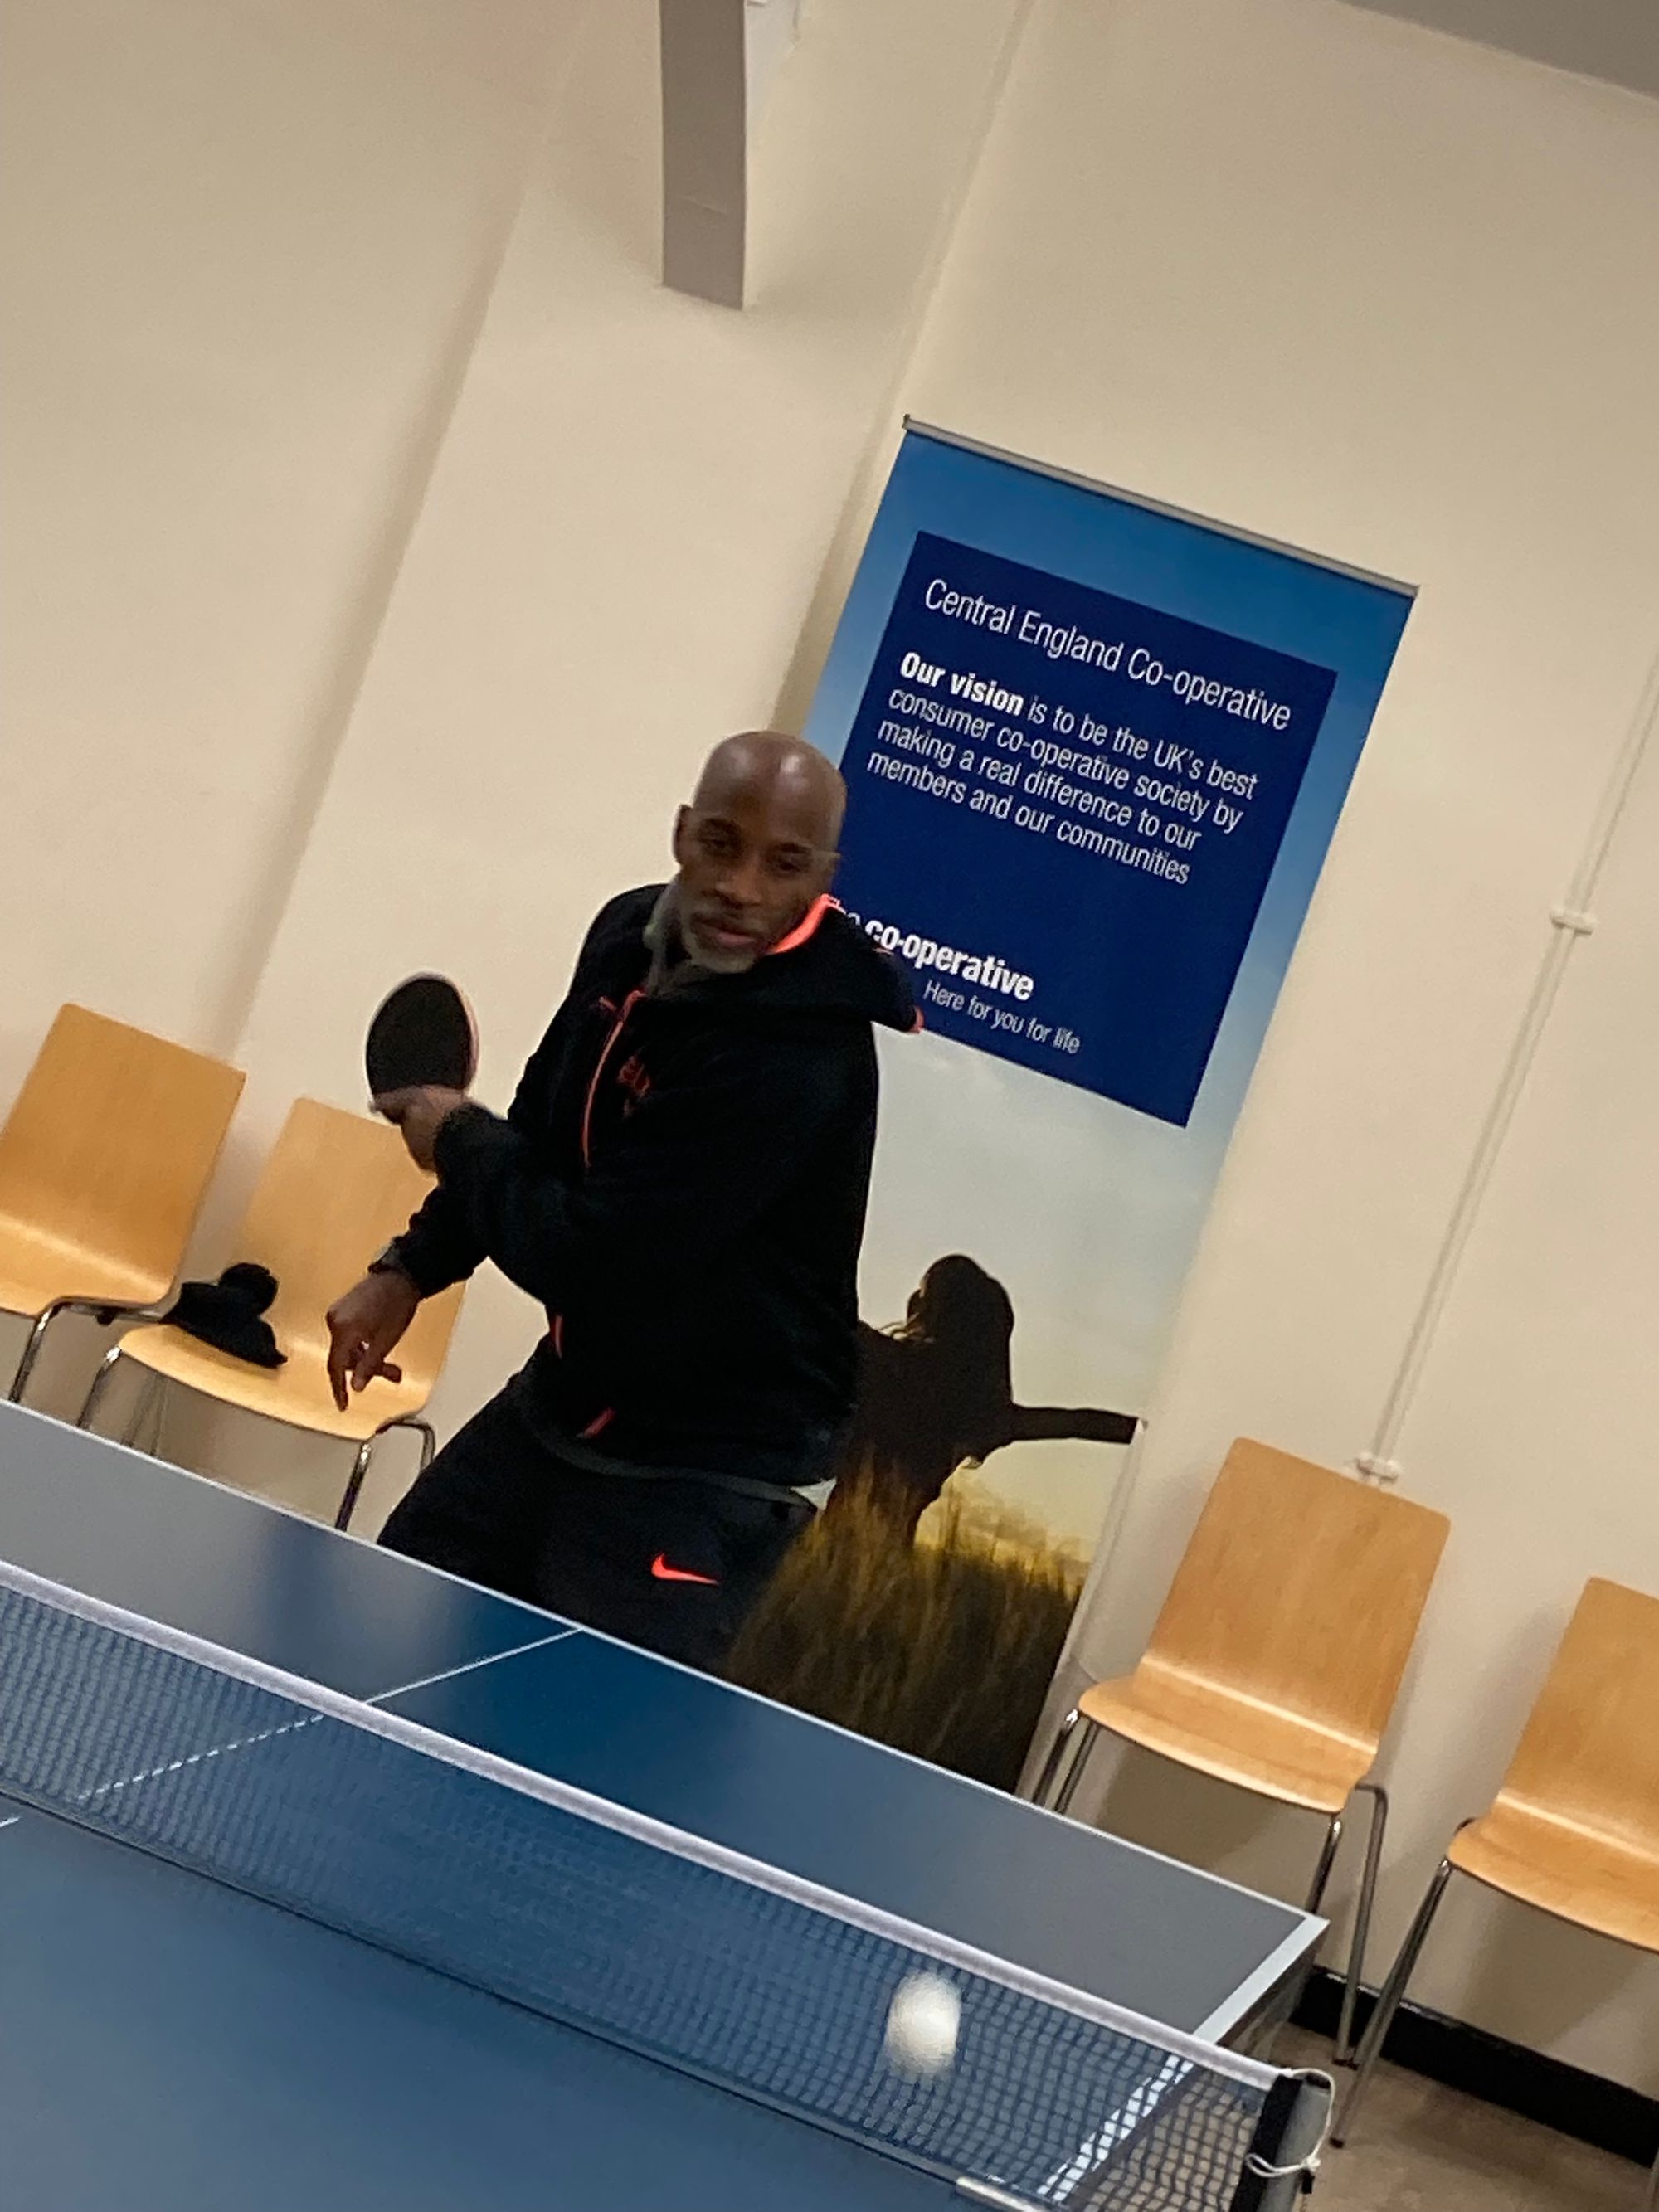 Table Tennis comes to Great Barr